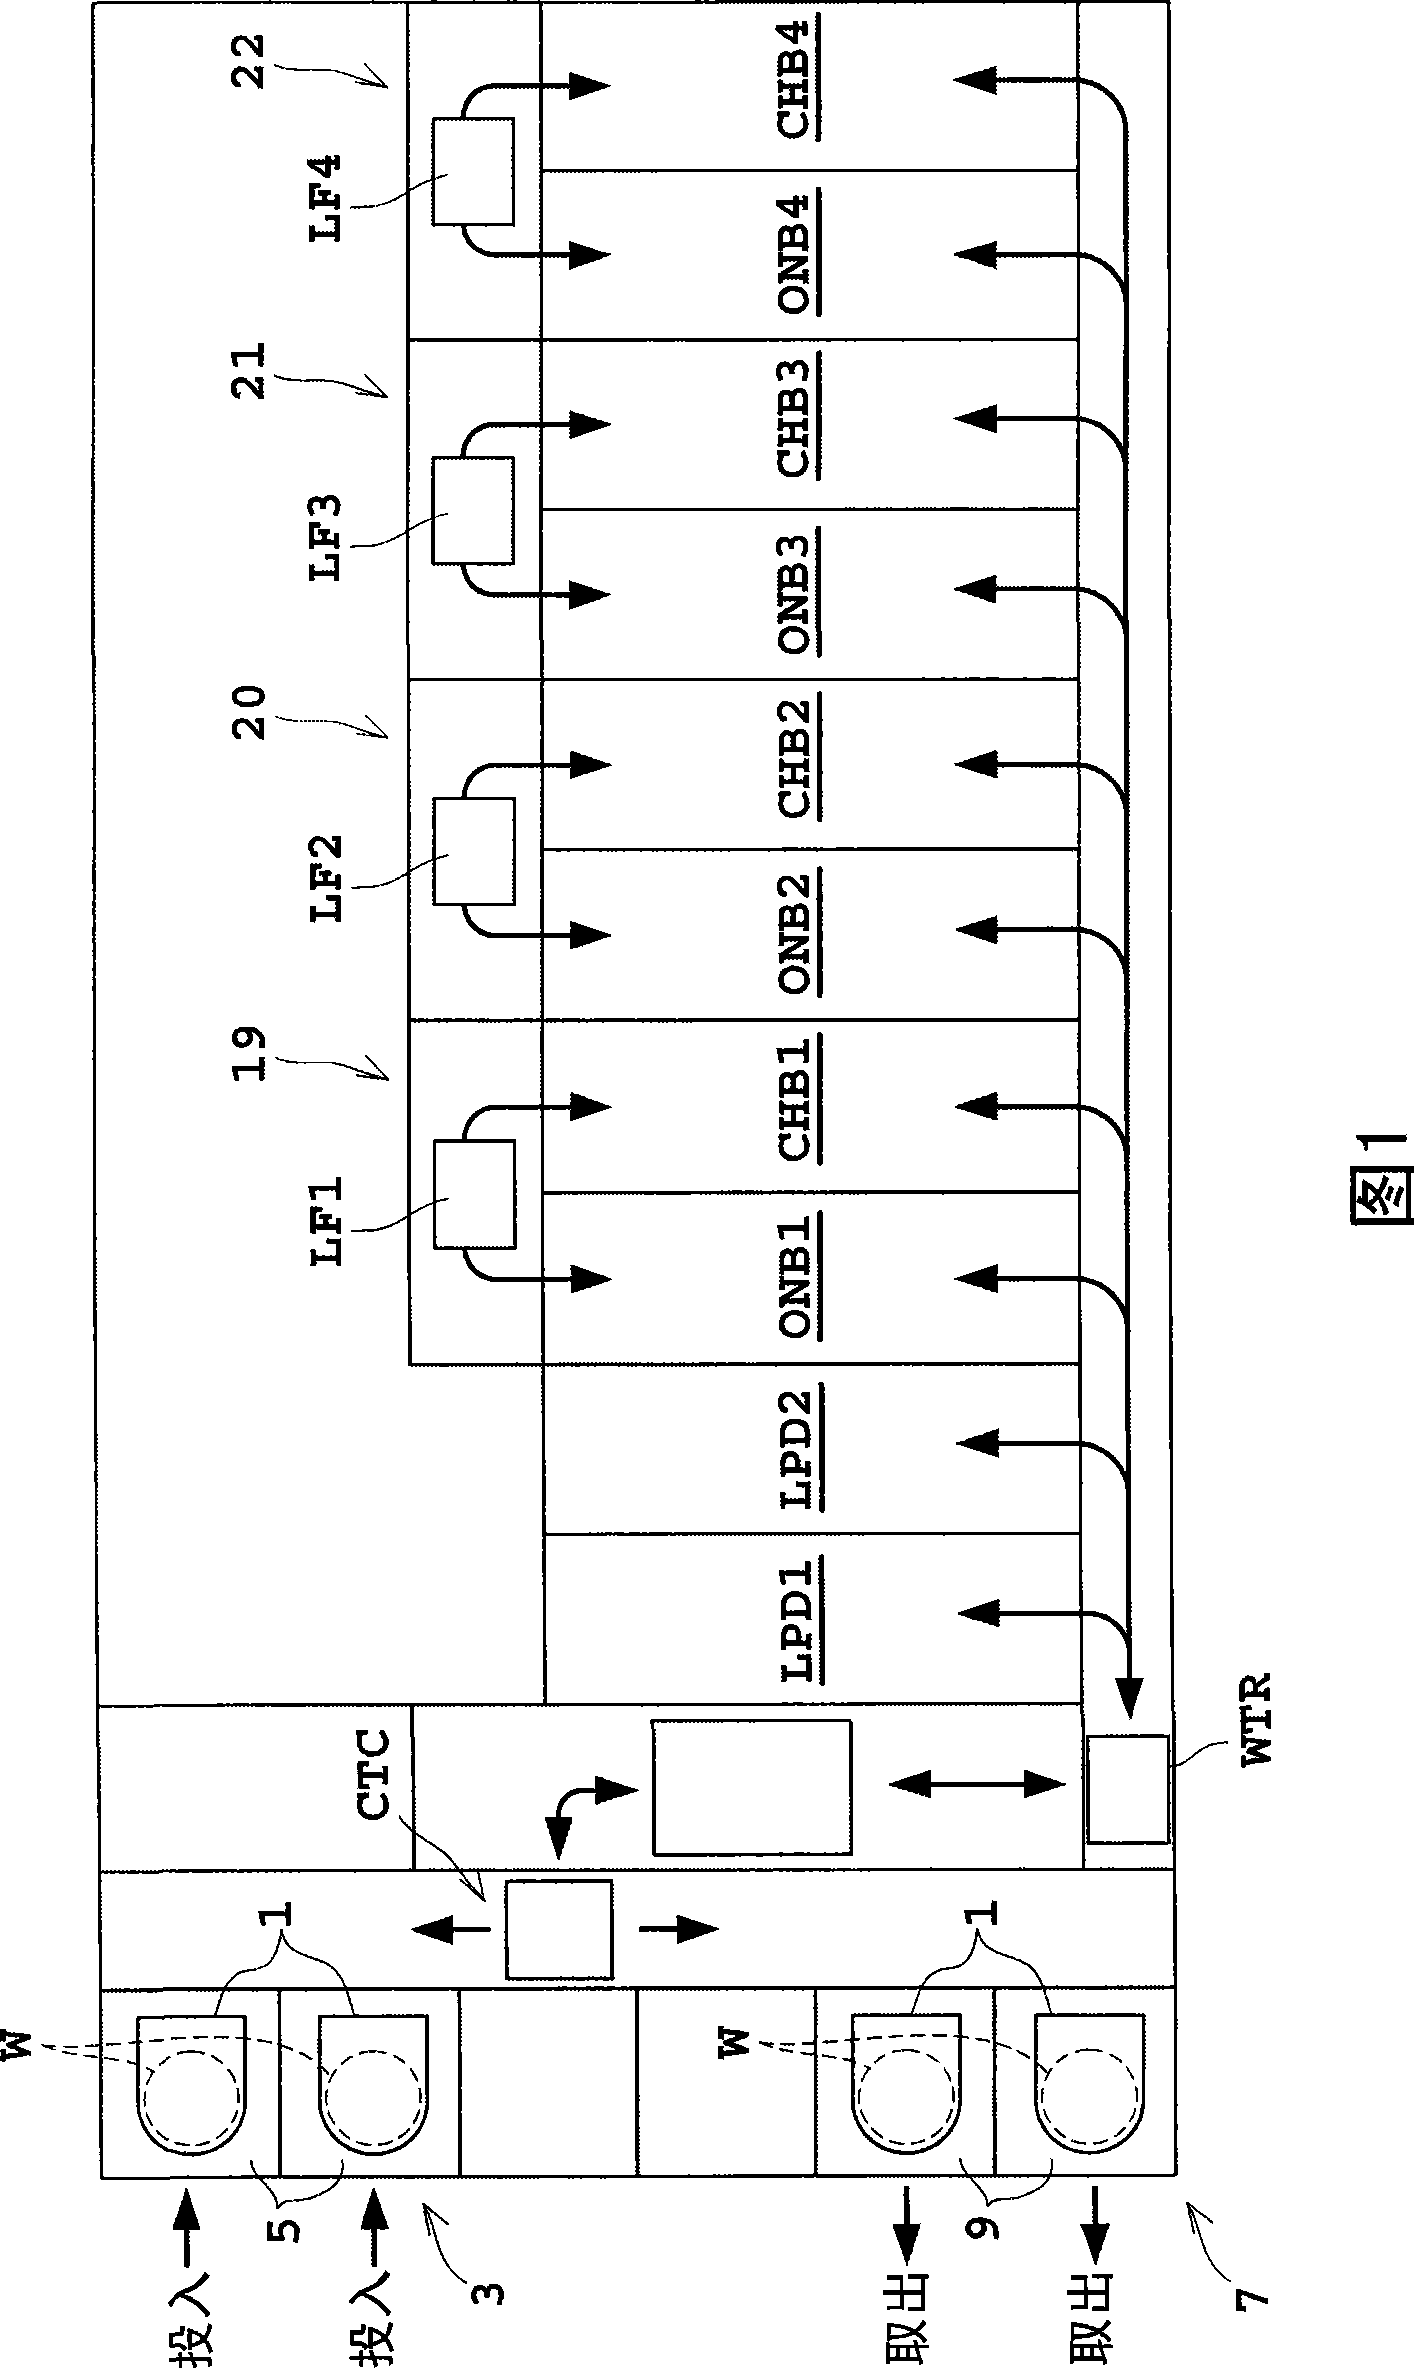 Scheduling method and program for a substrate treating apparatus